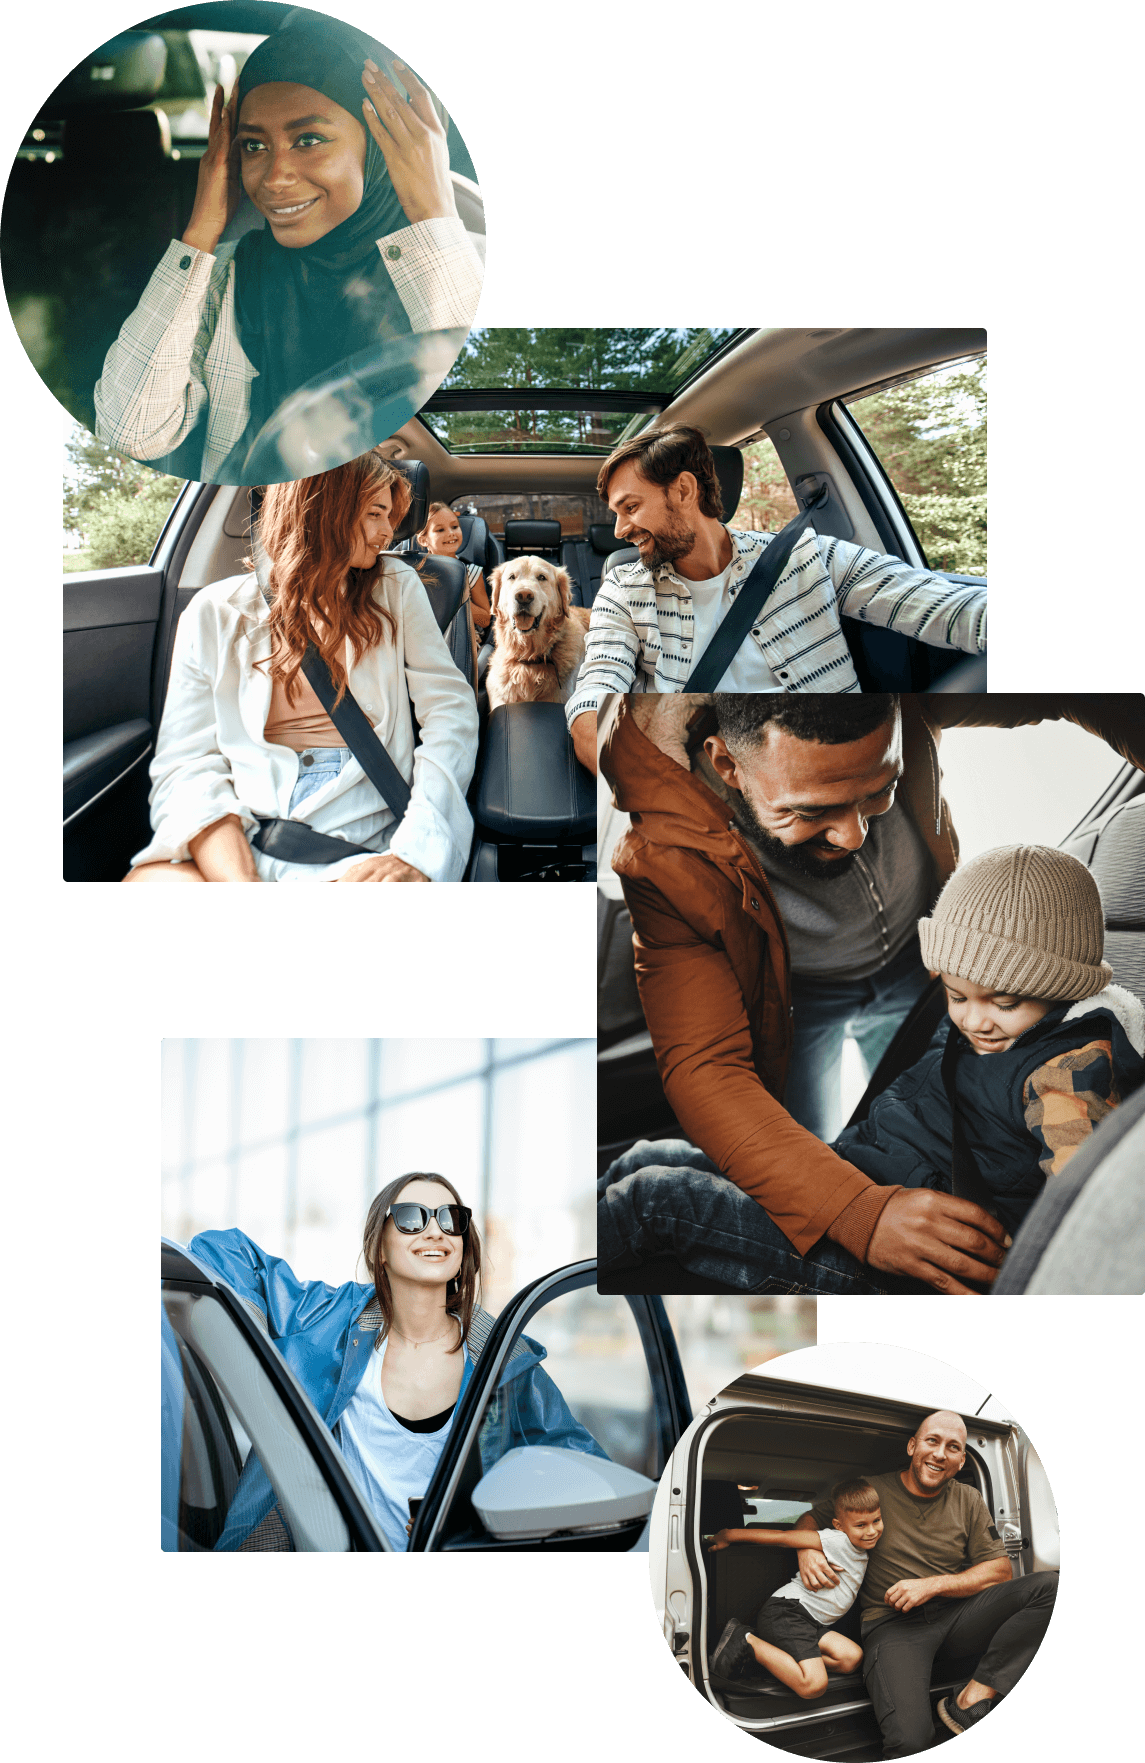 Multiple photos of passengers in or around a car for Knowsmoke's brand book